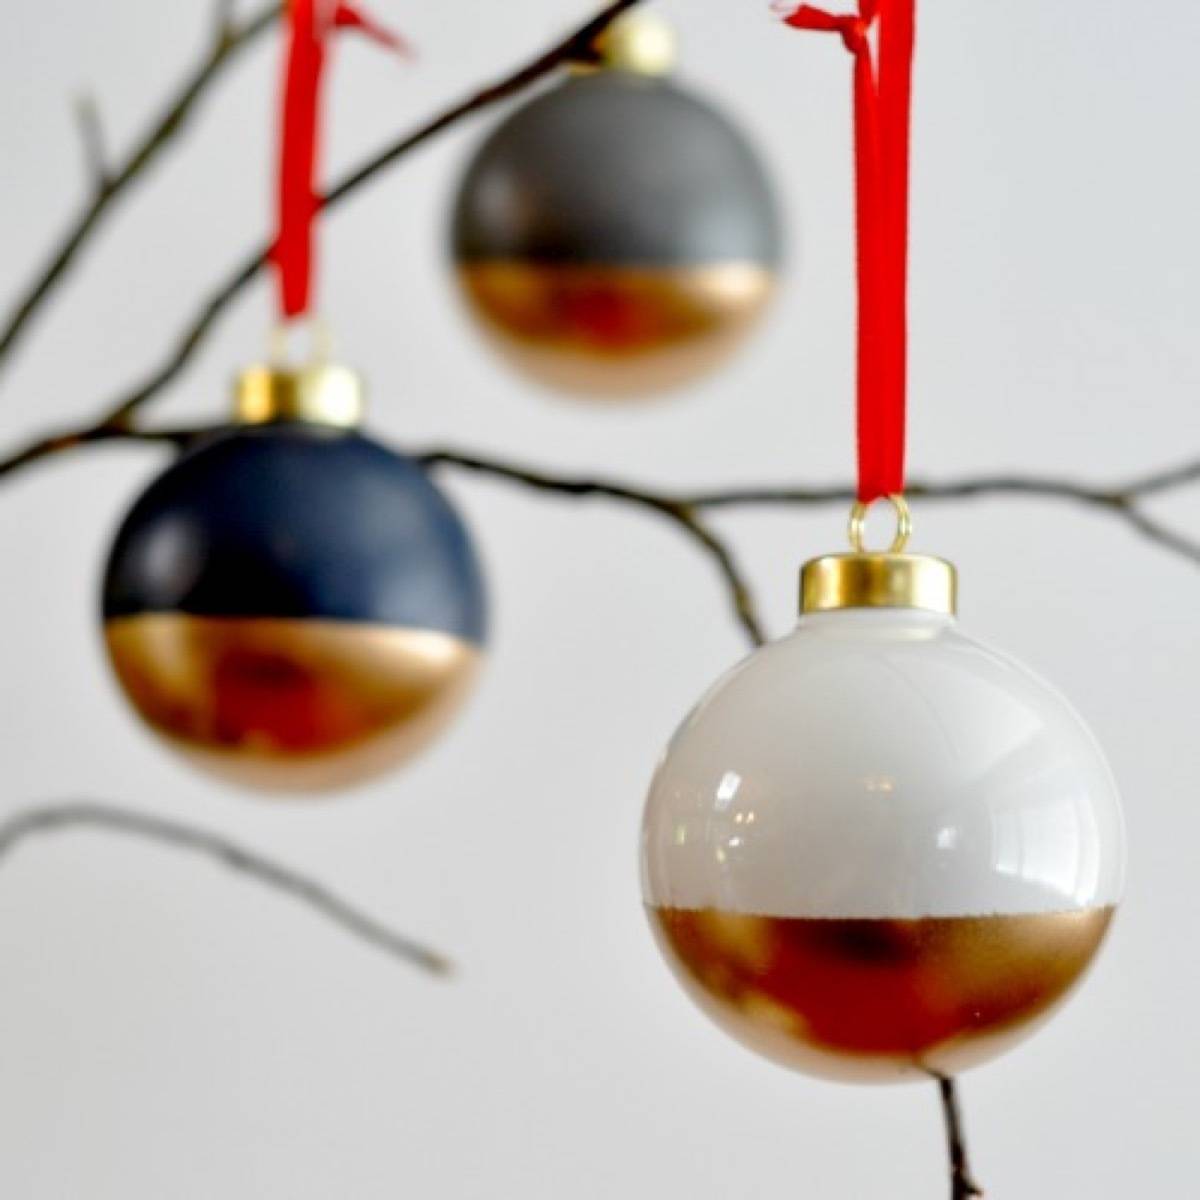 Do it yourself Christmas ornaments | Gold-dipped ornaments